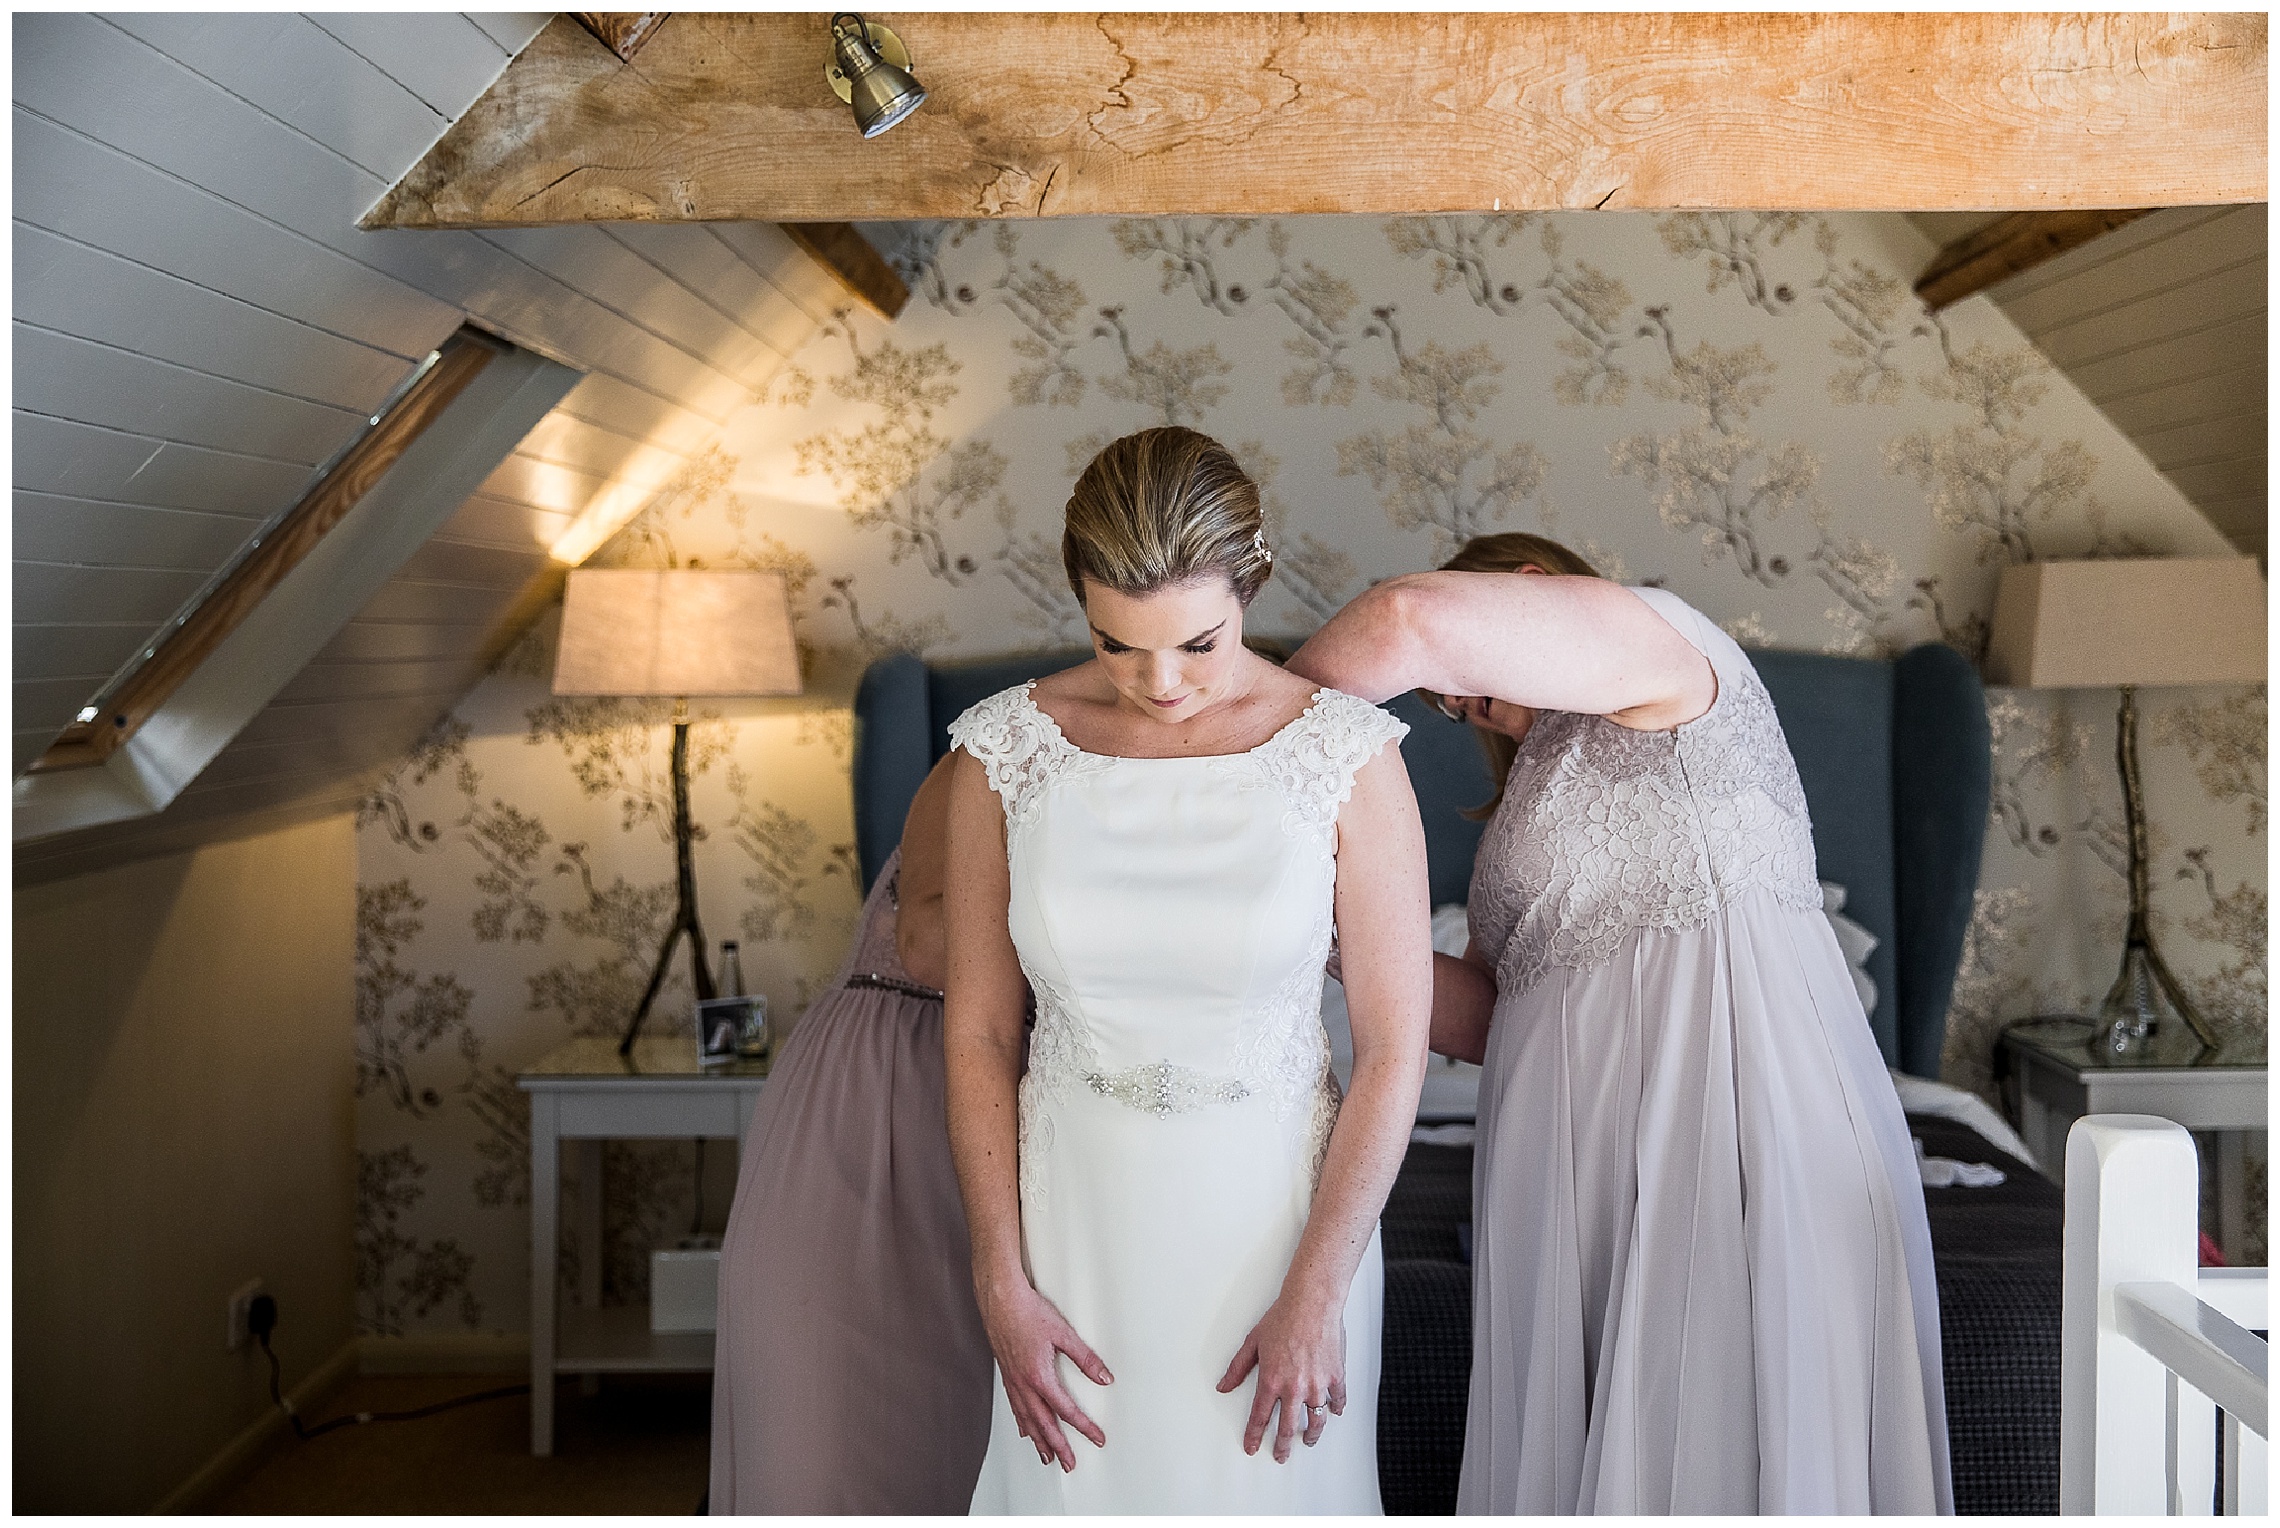 mother of bride and bridemsaid helping bride into sleek dress